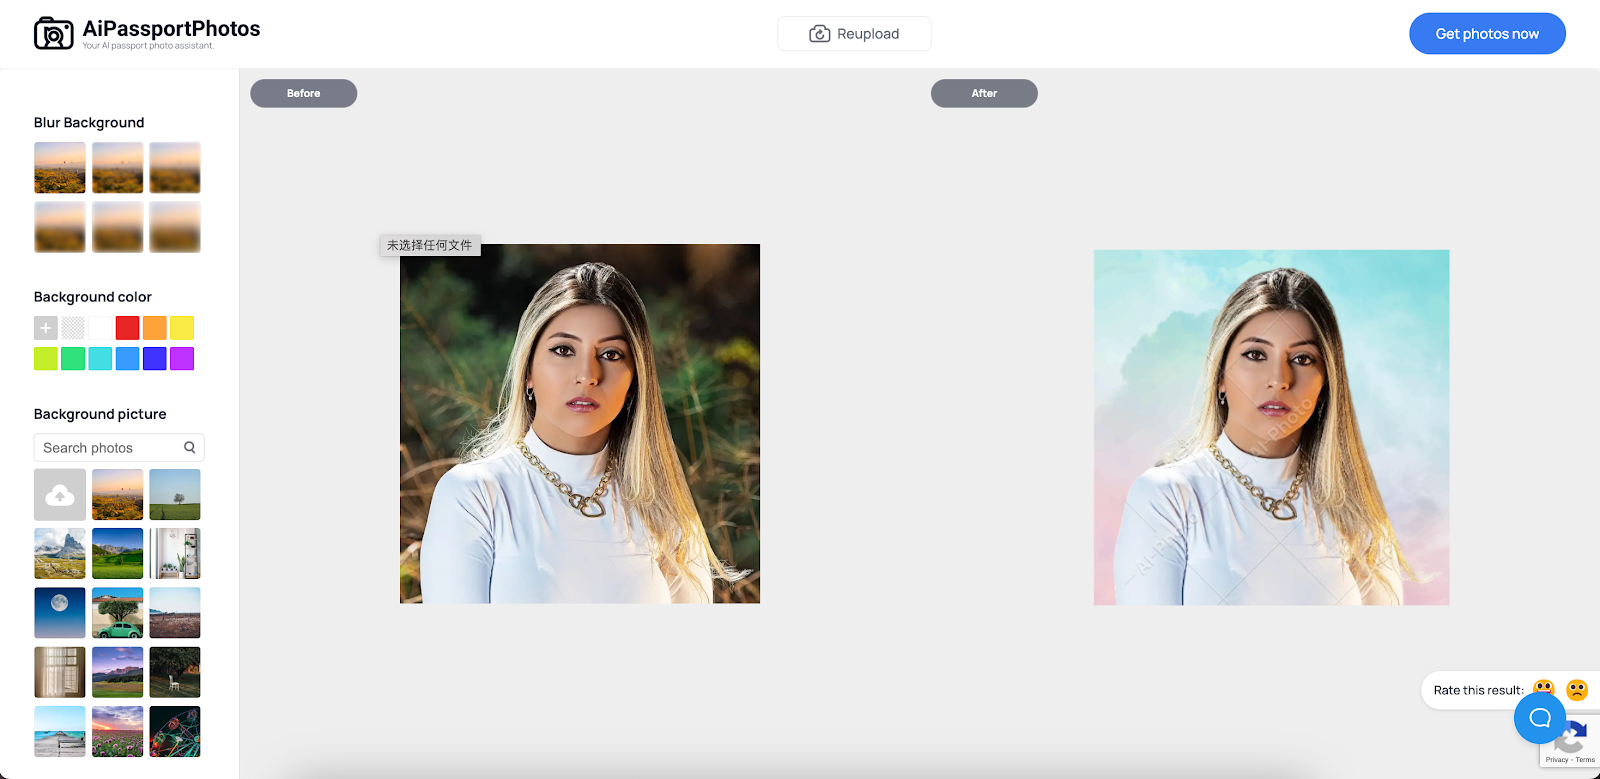 replacing image on AiPassportPhotos using the background downloaded from freepik